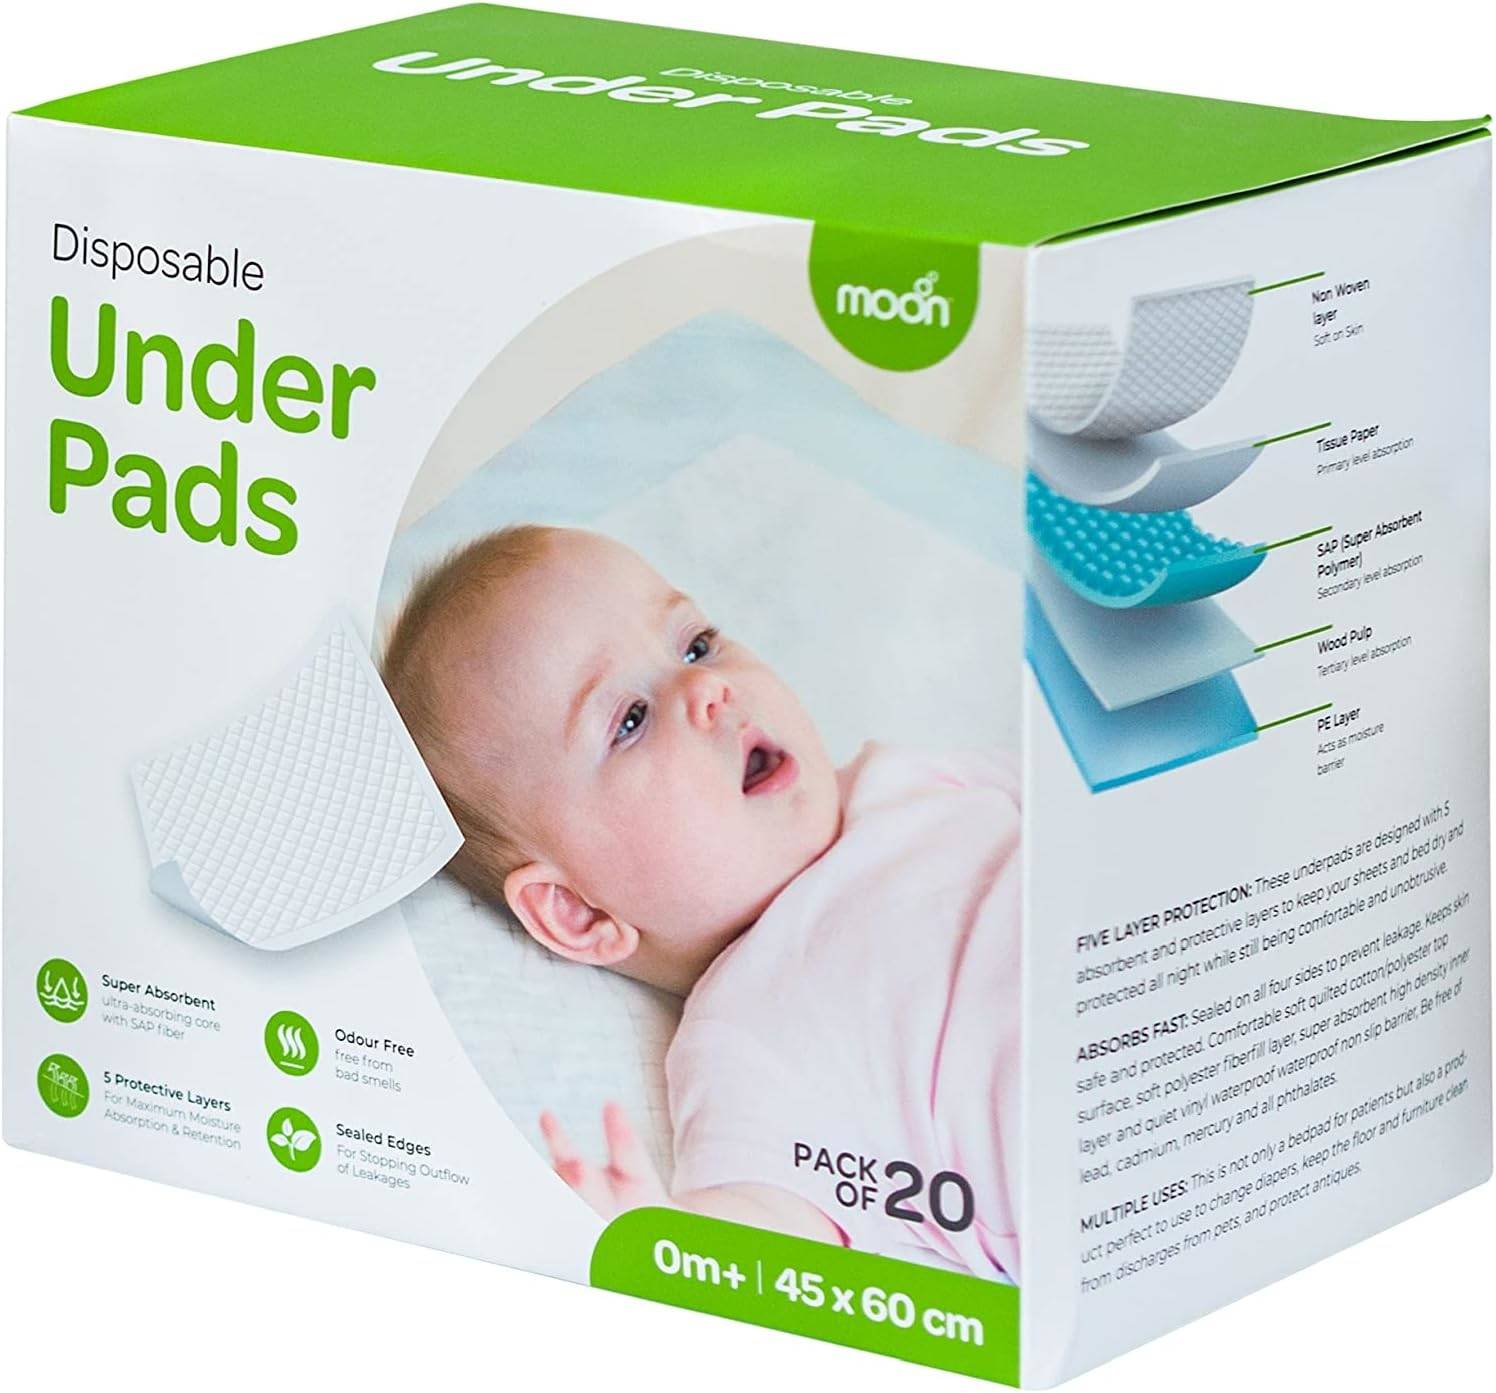 Moon Disposable Under Pads Diaper Changing Kits White - MNSDPMT06